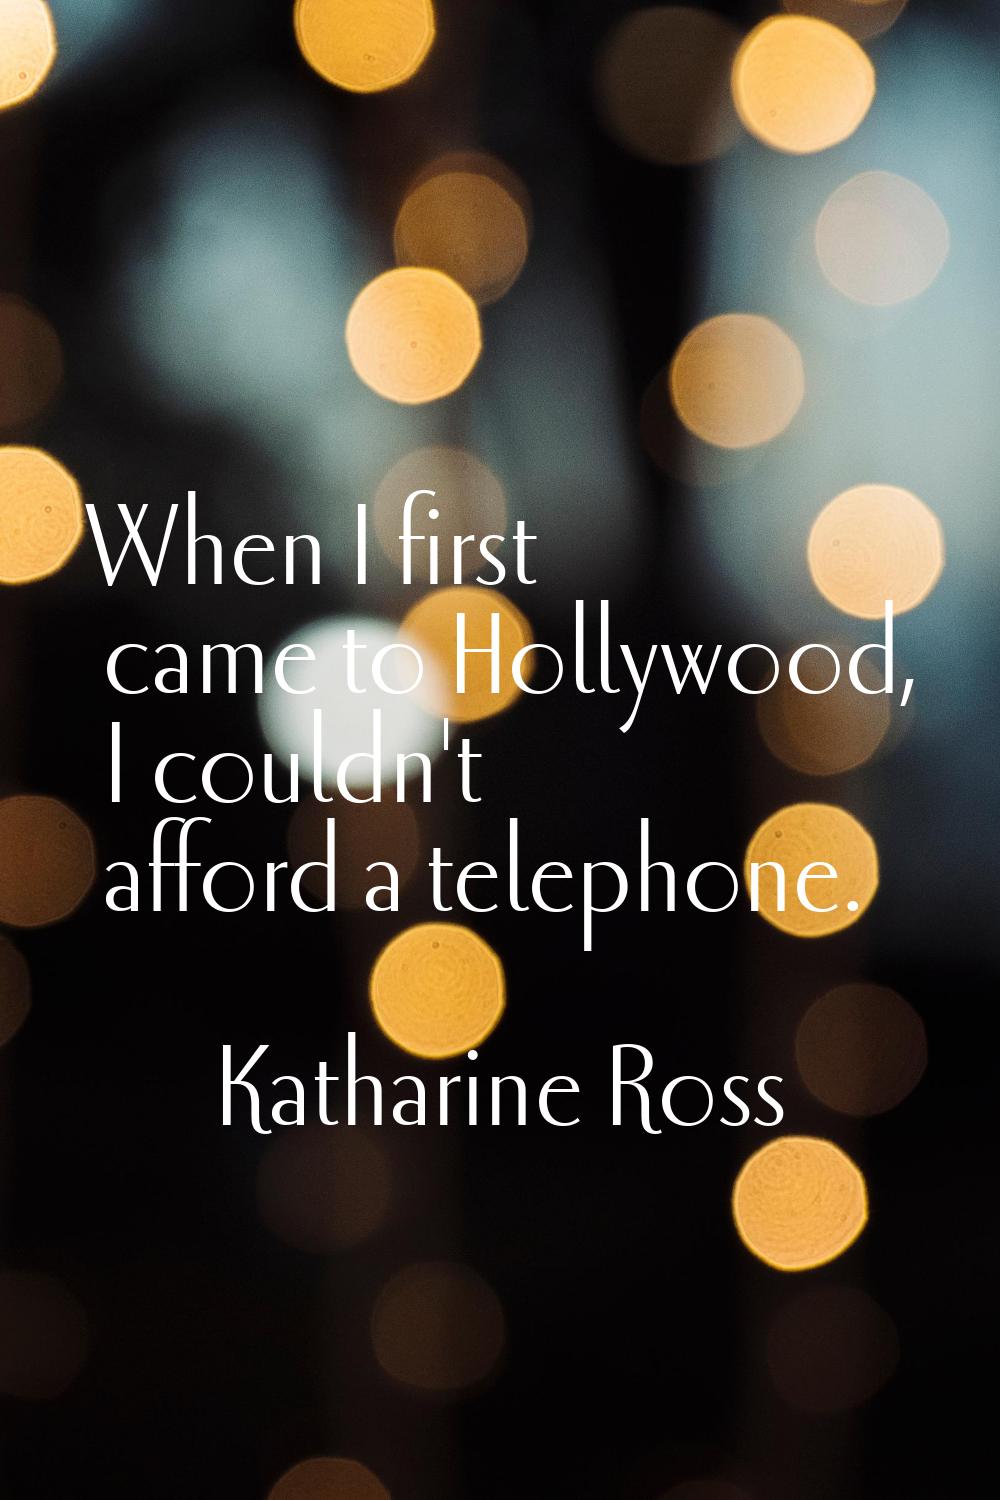 When I first came to Hollywood, I couldn't afford a telephone.